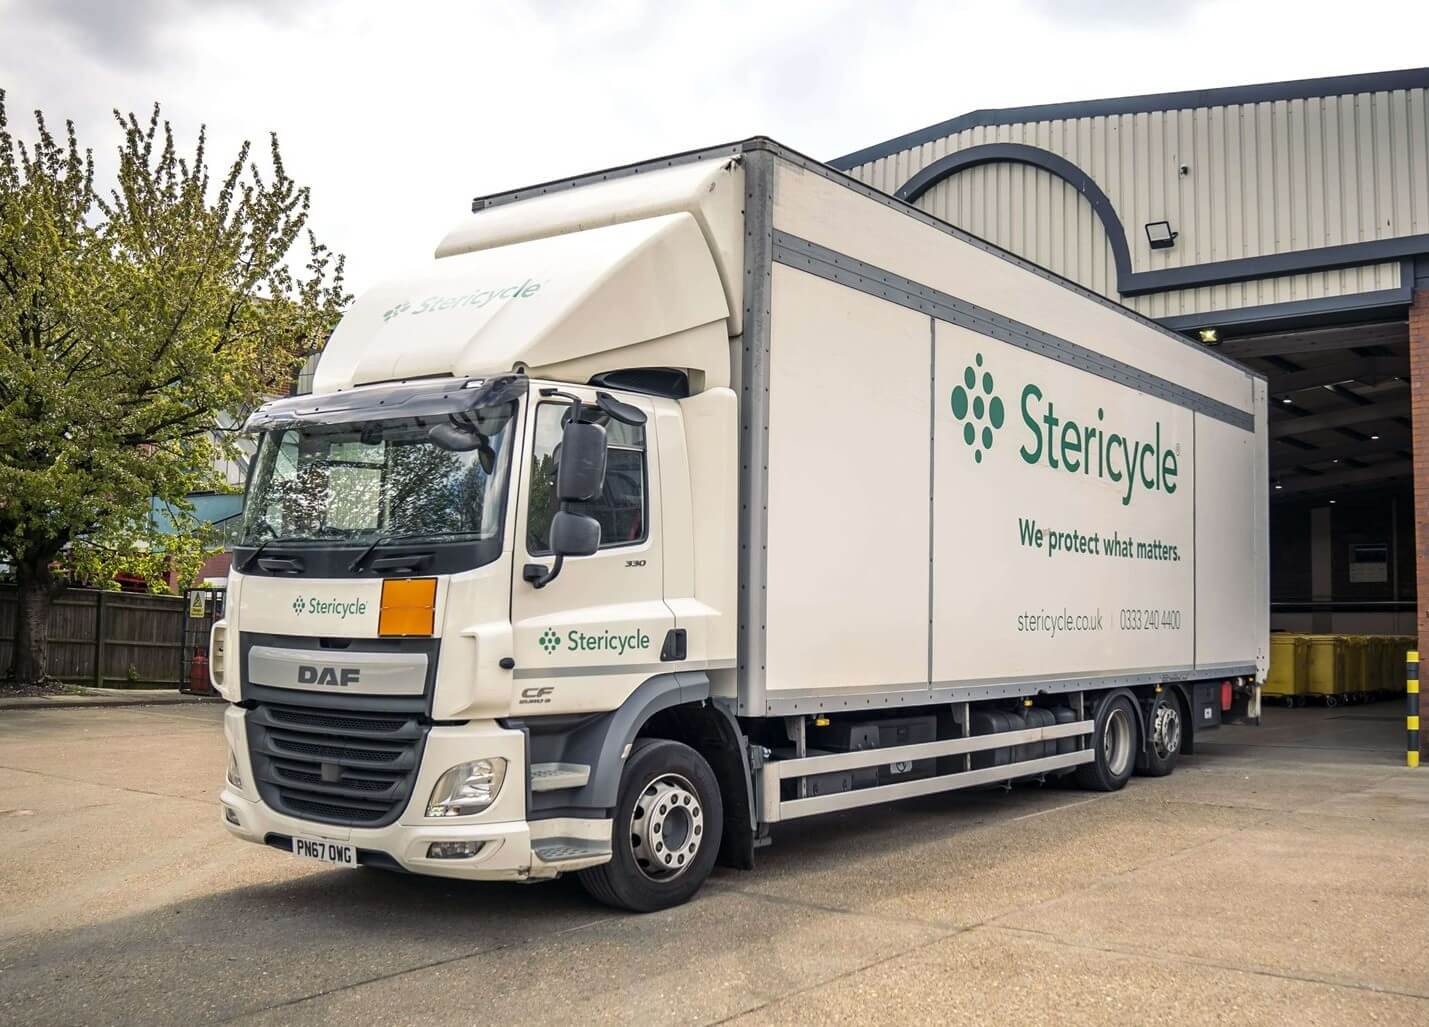 stericycle waste disposal truck at London facility